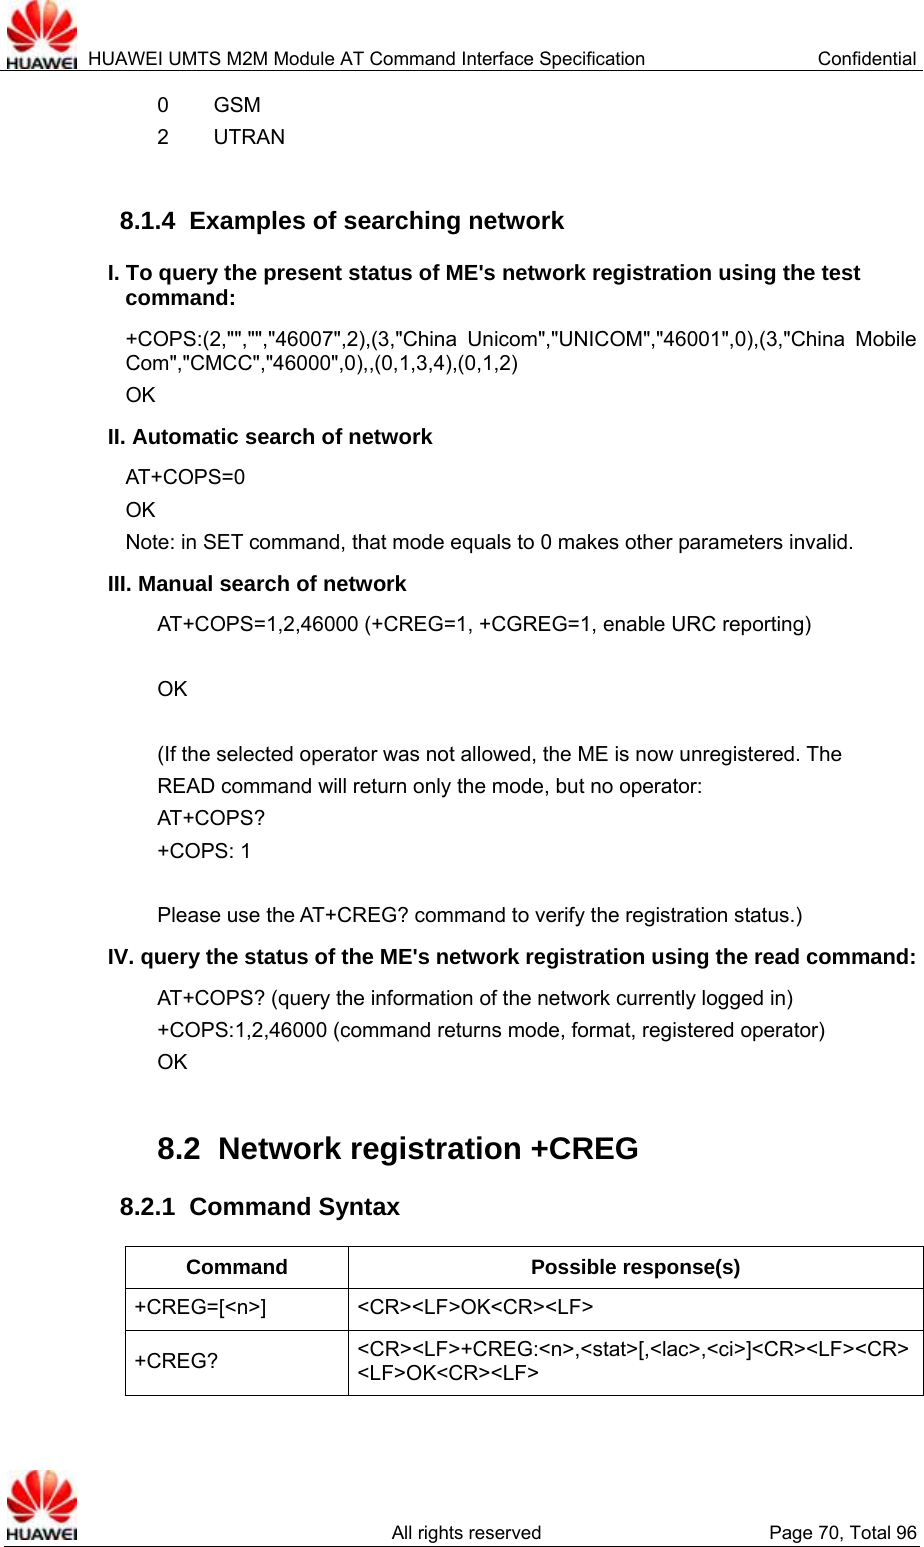  HUAWEI UMTS M2M Module AT Command Interface Specification  Confidential   All rights reserved  Page 70, Total 96 0     GSM 2     UTRAN  8.1.4  Examples of searching network I. To query the present status of ME&apos;s network registration using the test command: +COPS:(2,&quot;&quot;,&quot;&quot;,&quot;46007&quot;,2),(3,&quot;China Unicom&quot;,&quot;UNICOM&quot;,&quot;46001&quot;,0),(3,&quot;China Mobile Com&quot;,&quot;CMCC&quot;,&quot;46000&quot;,0),,(0,1,3,4),(0,1,2) OK II. Automatic search of network AT+COPS=0 OK Note: in SET command, that mode equals to 0 makes other parameters invalid. III. Manual search of network AT+COPS=1,2,46000 (+CREG=1, +CGREG=1, enable URC reporting)  OK  (If the selected operator was not allowed, the ME is now unregistered. The READ command will return only the mode, but no operator: AT+COPS? +COPS: 1  Please use the AT+CREG? command to verify the registration status.) IV. query the status of the ME&apos;s network registration using the read command: AT+COPS? (query the information of the network currently logged in) +COPS:1,2,46000 (command returns mode, format, registered operator) OK  8.2  Network registration +CREG 8.2.1  Command Syntax Command Possible response(s) +CREG=[&lt;n&gt;] &lt;CR&gt;&lt;LF&gt;OK&lt;CR&gt;&lt;LF&gt; +CREG?  &lt;CR&gt;&lt;LF&gt;+CREG:&lt;n&gt;,&lt;stat&gt;[,&lt;lac&gt;,&lt;ci&gt;]&lt;CR&gt;&lt;LF&gt;&lt;CR&gt;&lt;LF&gt;OK&lt;CR&gt;&lt;LF&gt; 